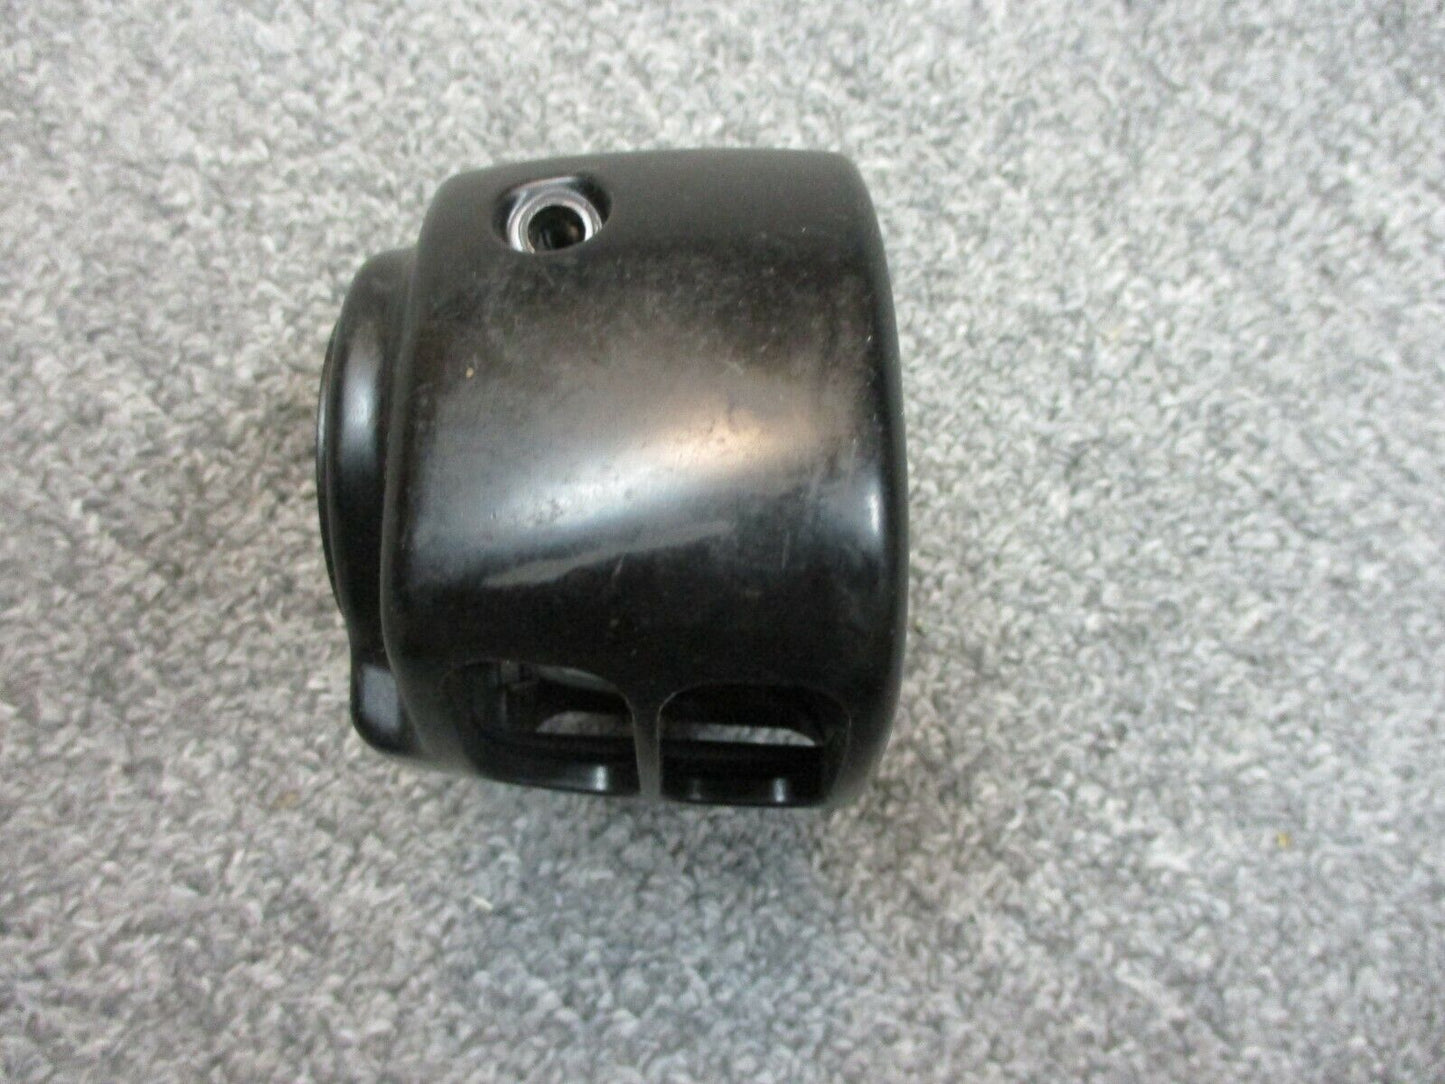 Harley OEM Left Touring Switch Housing No/Cruise Control Black 71558-96A 06-13